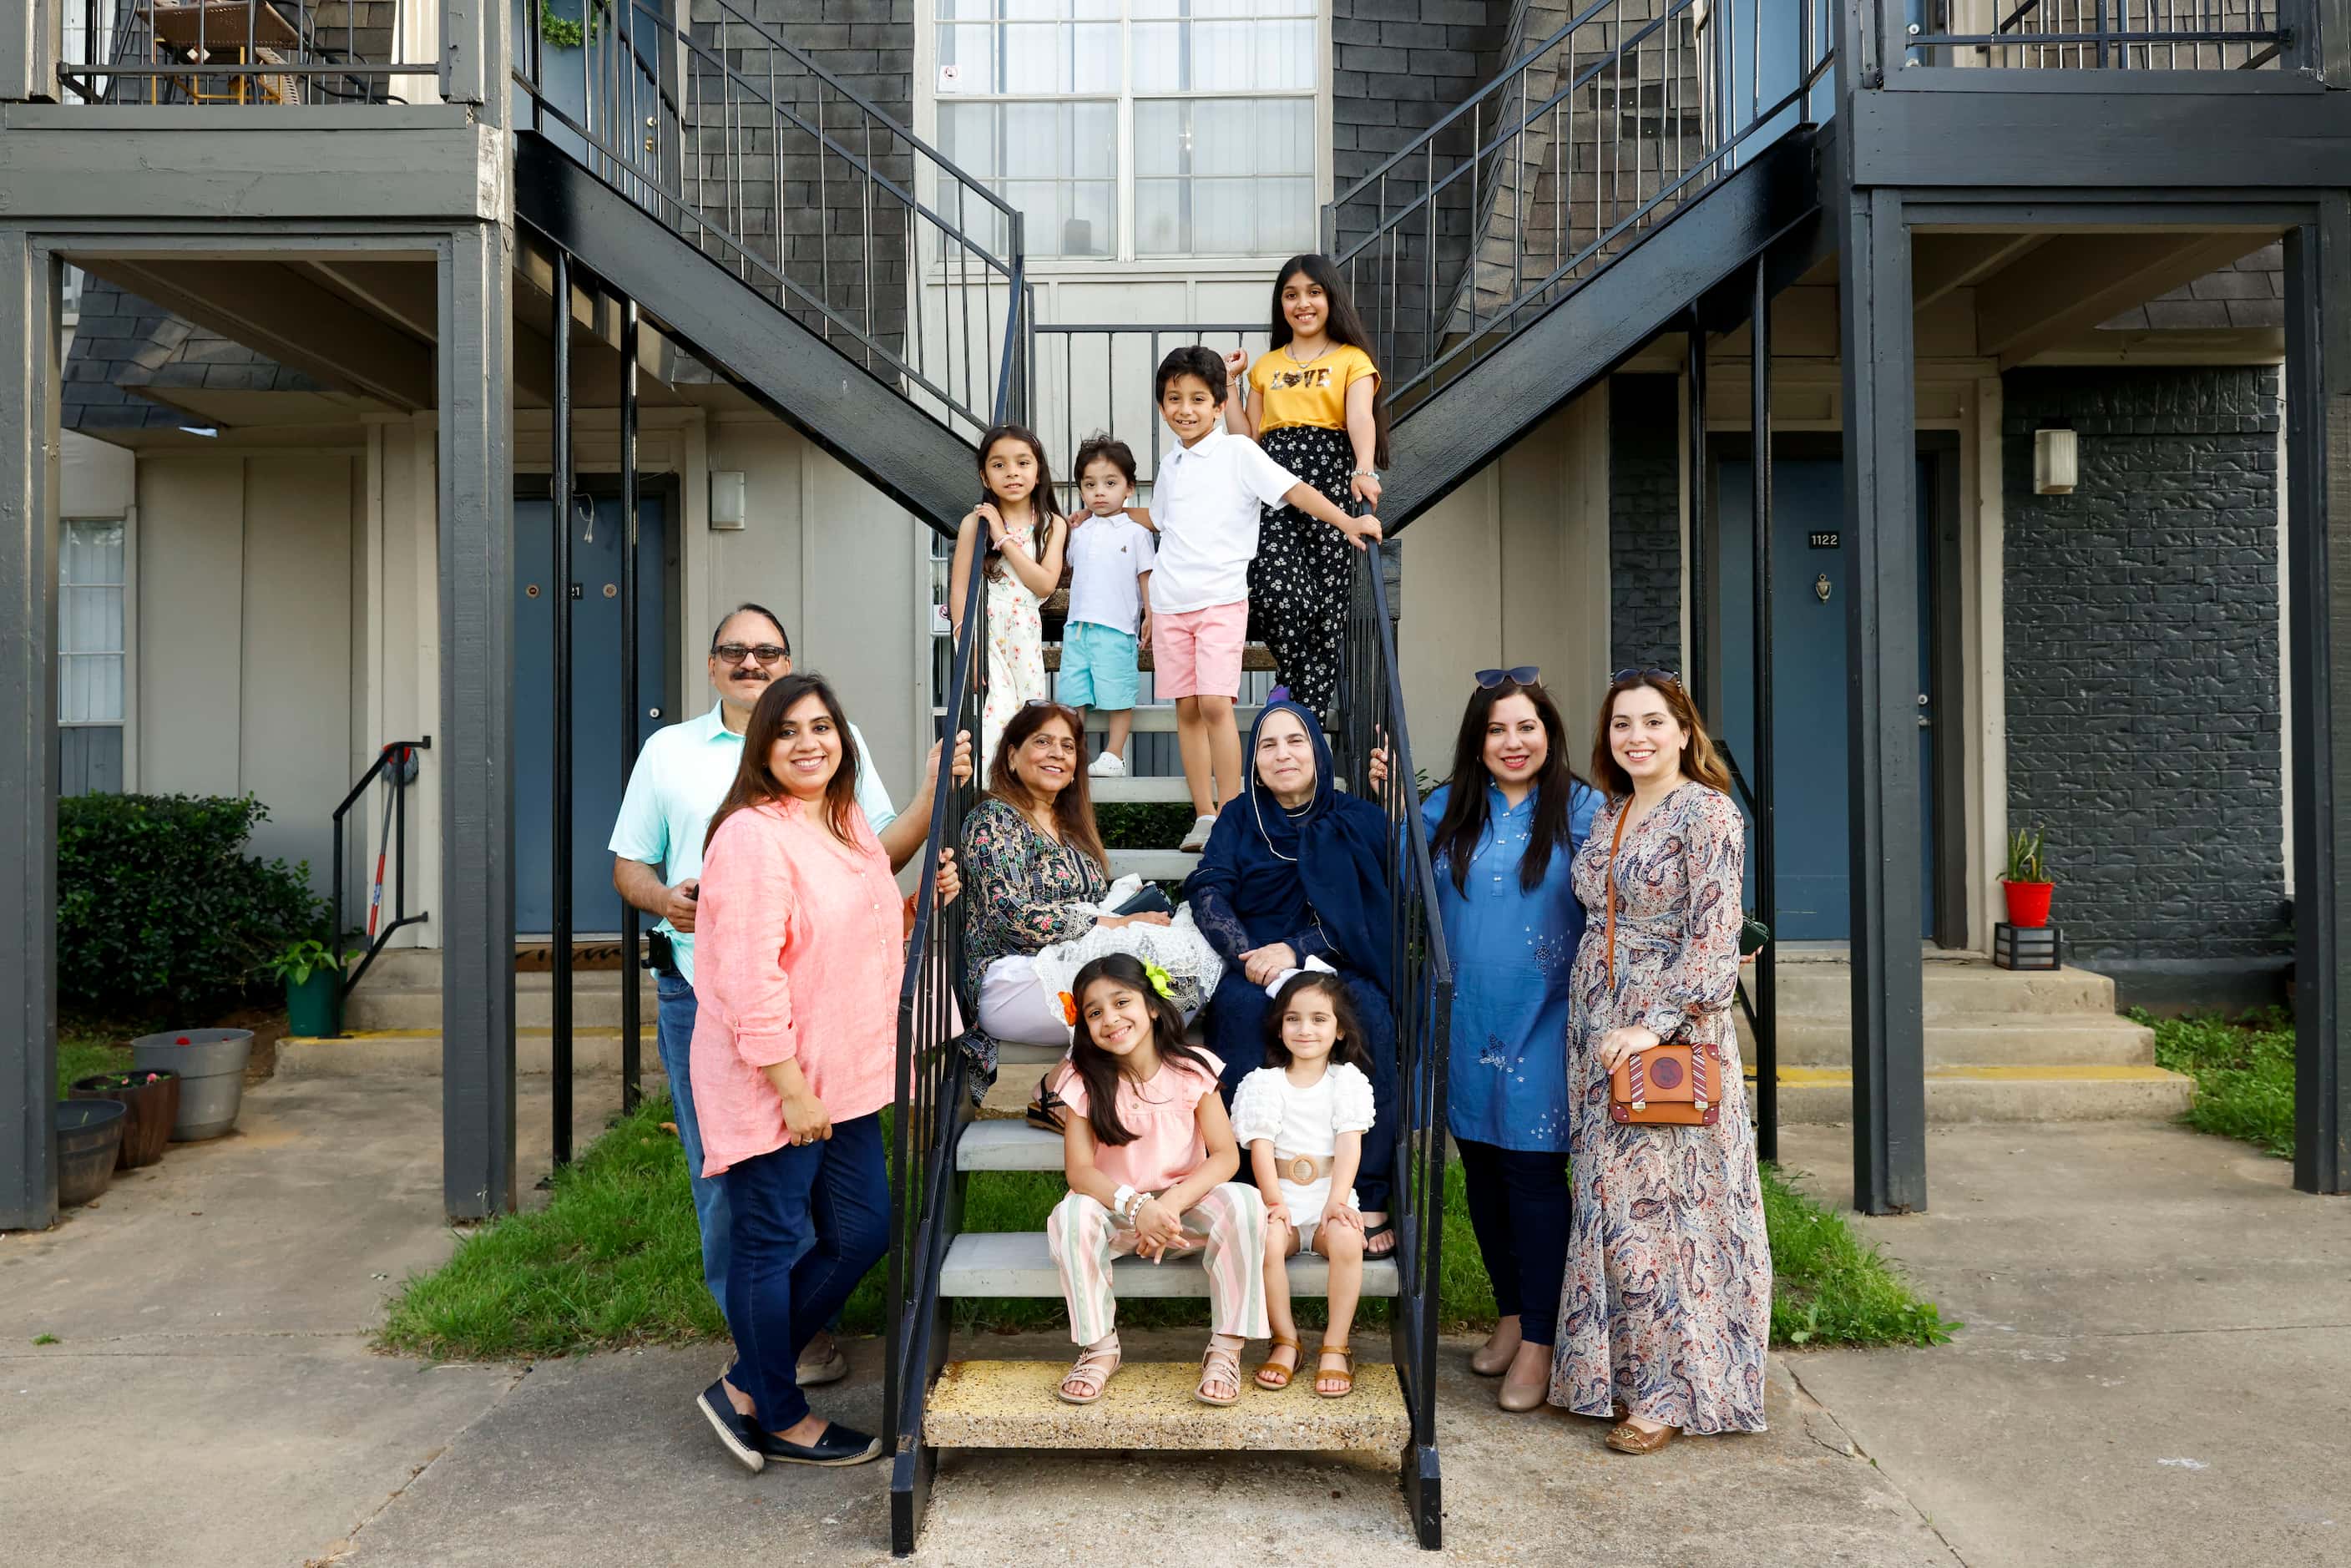 Former Wingren Village Apartments residents Mohammed Humayoun Butt (back left), his daughter...